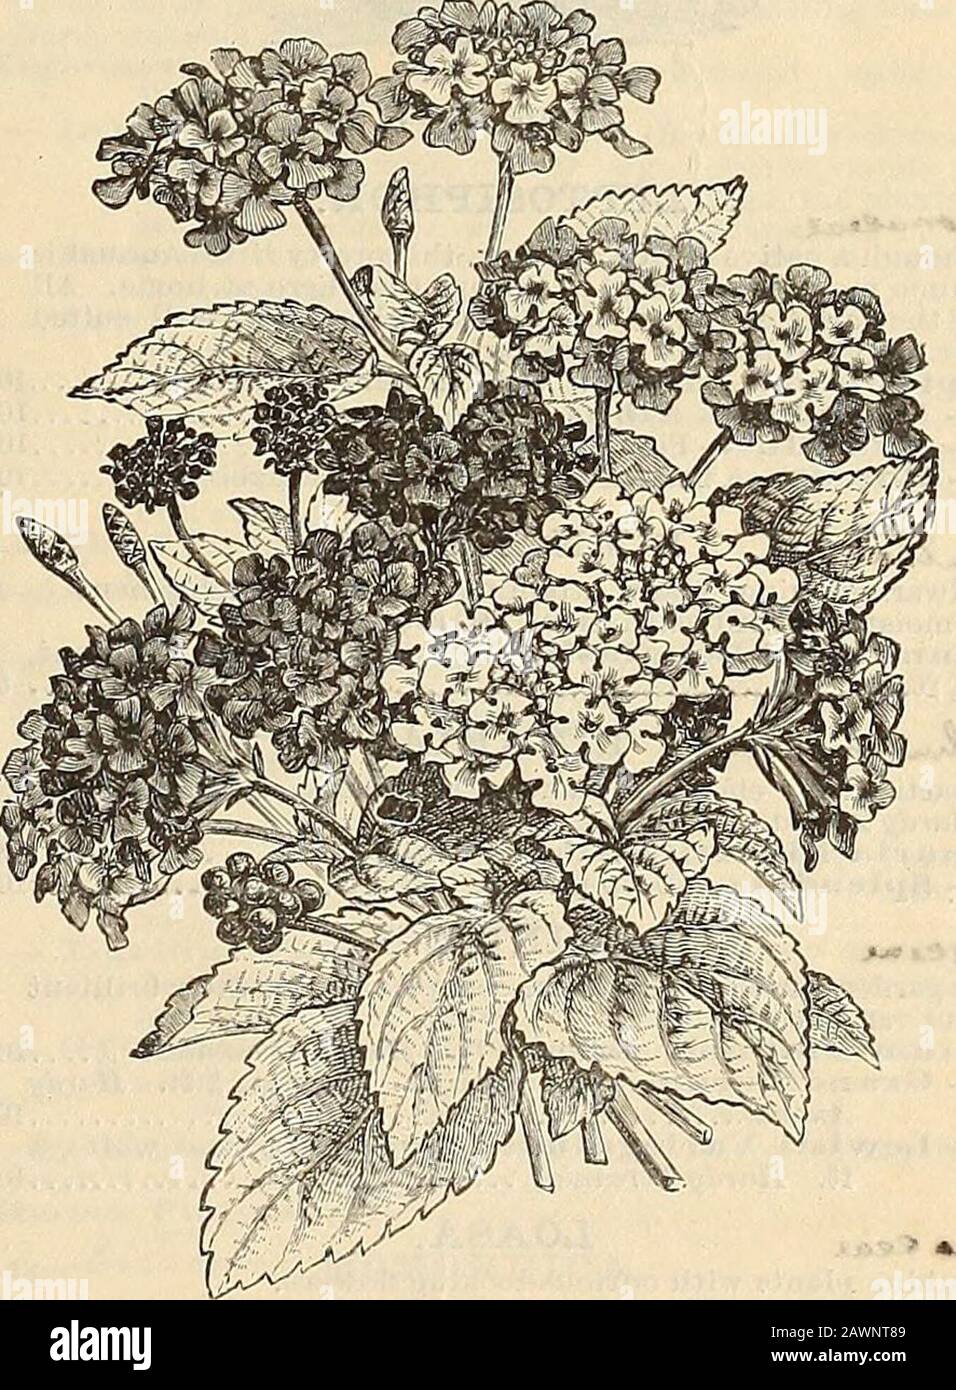 Peter Henderson & Co.'s catalogue of everything for the garden : 1880 . £ ft 5 Rosea. Pink, mauve centre, yz ft 5. W»-w««^t&lt;a. Lantana Hybkida. LANTANA. The varieties of Lantana are almost numberless. The flowersare borne in Verbena-like heads, embracing every shade ofpink, purple, orange and white. Haf-I ardy Perennials. Lantana Hybricla. Mixed 10 16 PETER HENDERSON & CO.—FLOWER SEEDS. ^^^^^^LARKSPUE, (Delphinium). PerPkt. A mostdesrrable and beautiful genus, the prevailing hue of whose flowers is blue. Hardy Annuals.Larkspur, Dwarf Rocket. Finest mixed, double, 1 ft. 5 Tall Rocket. Finest Stock Photo